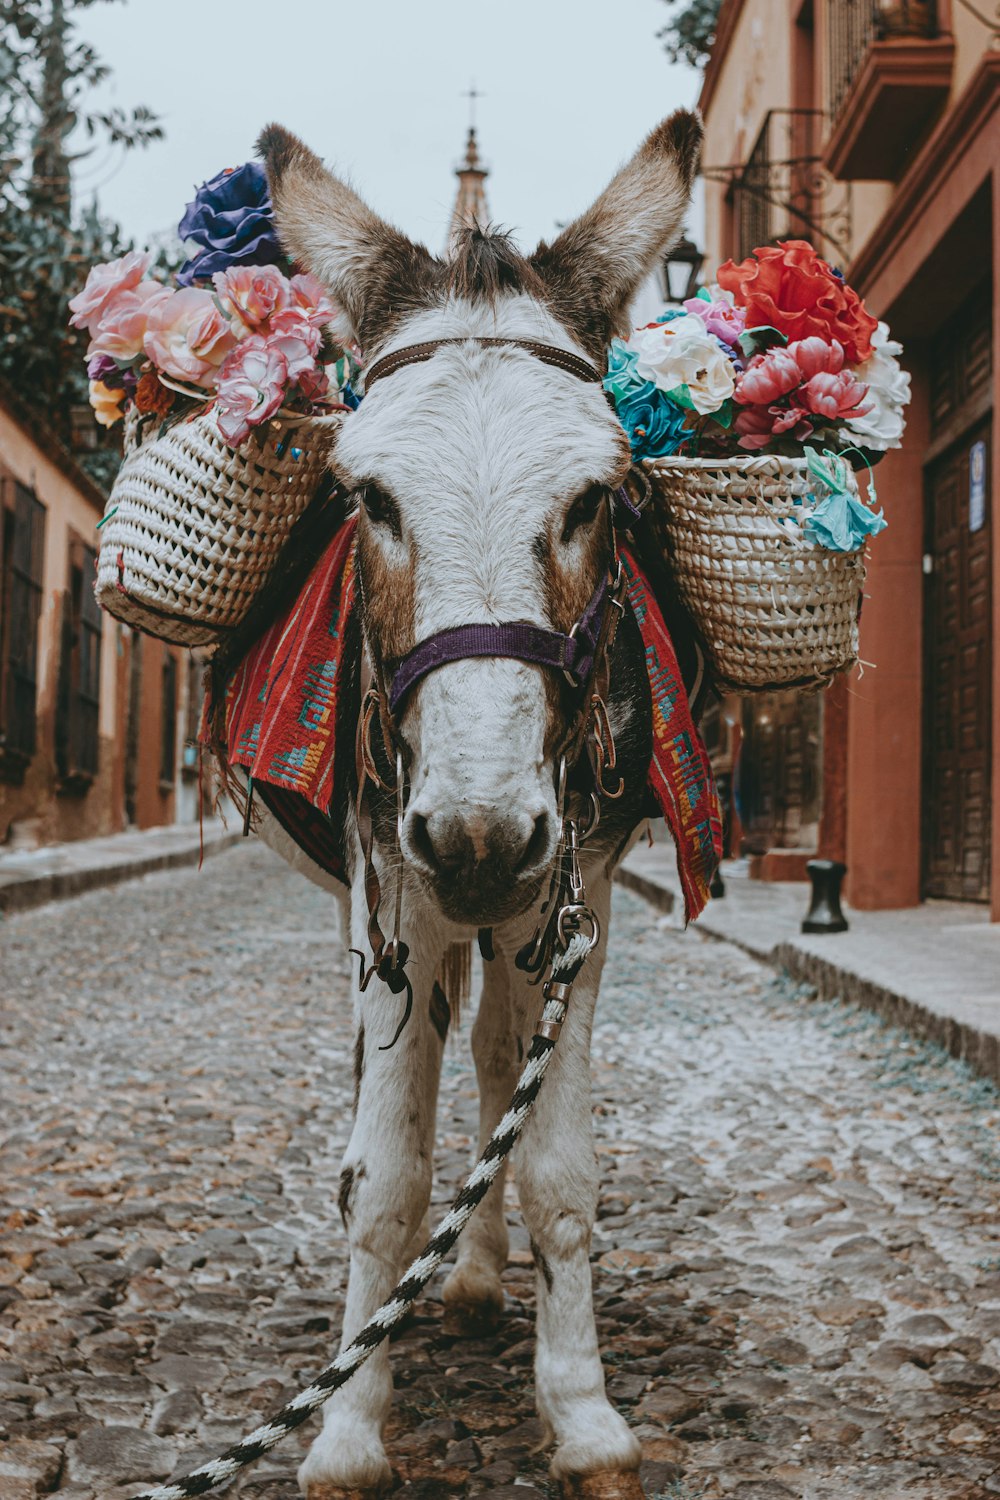 a donkey with baskets on its back walking down a cobblestone street